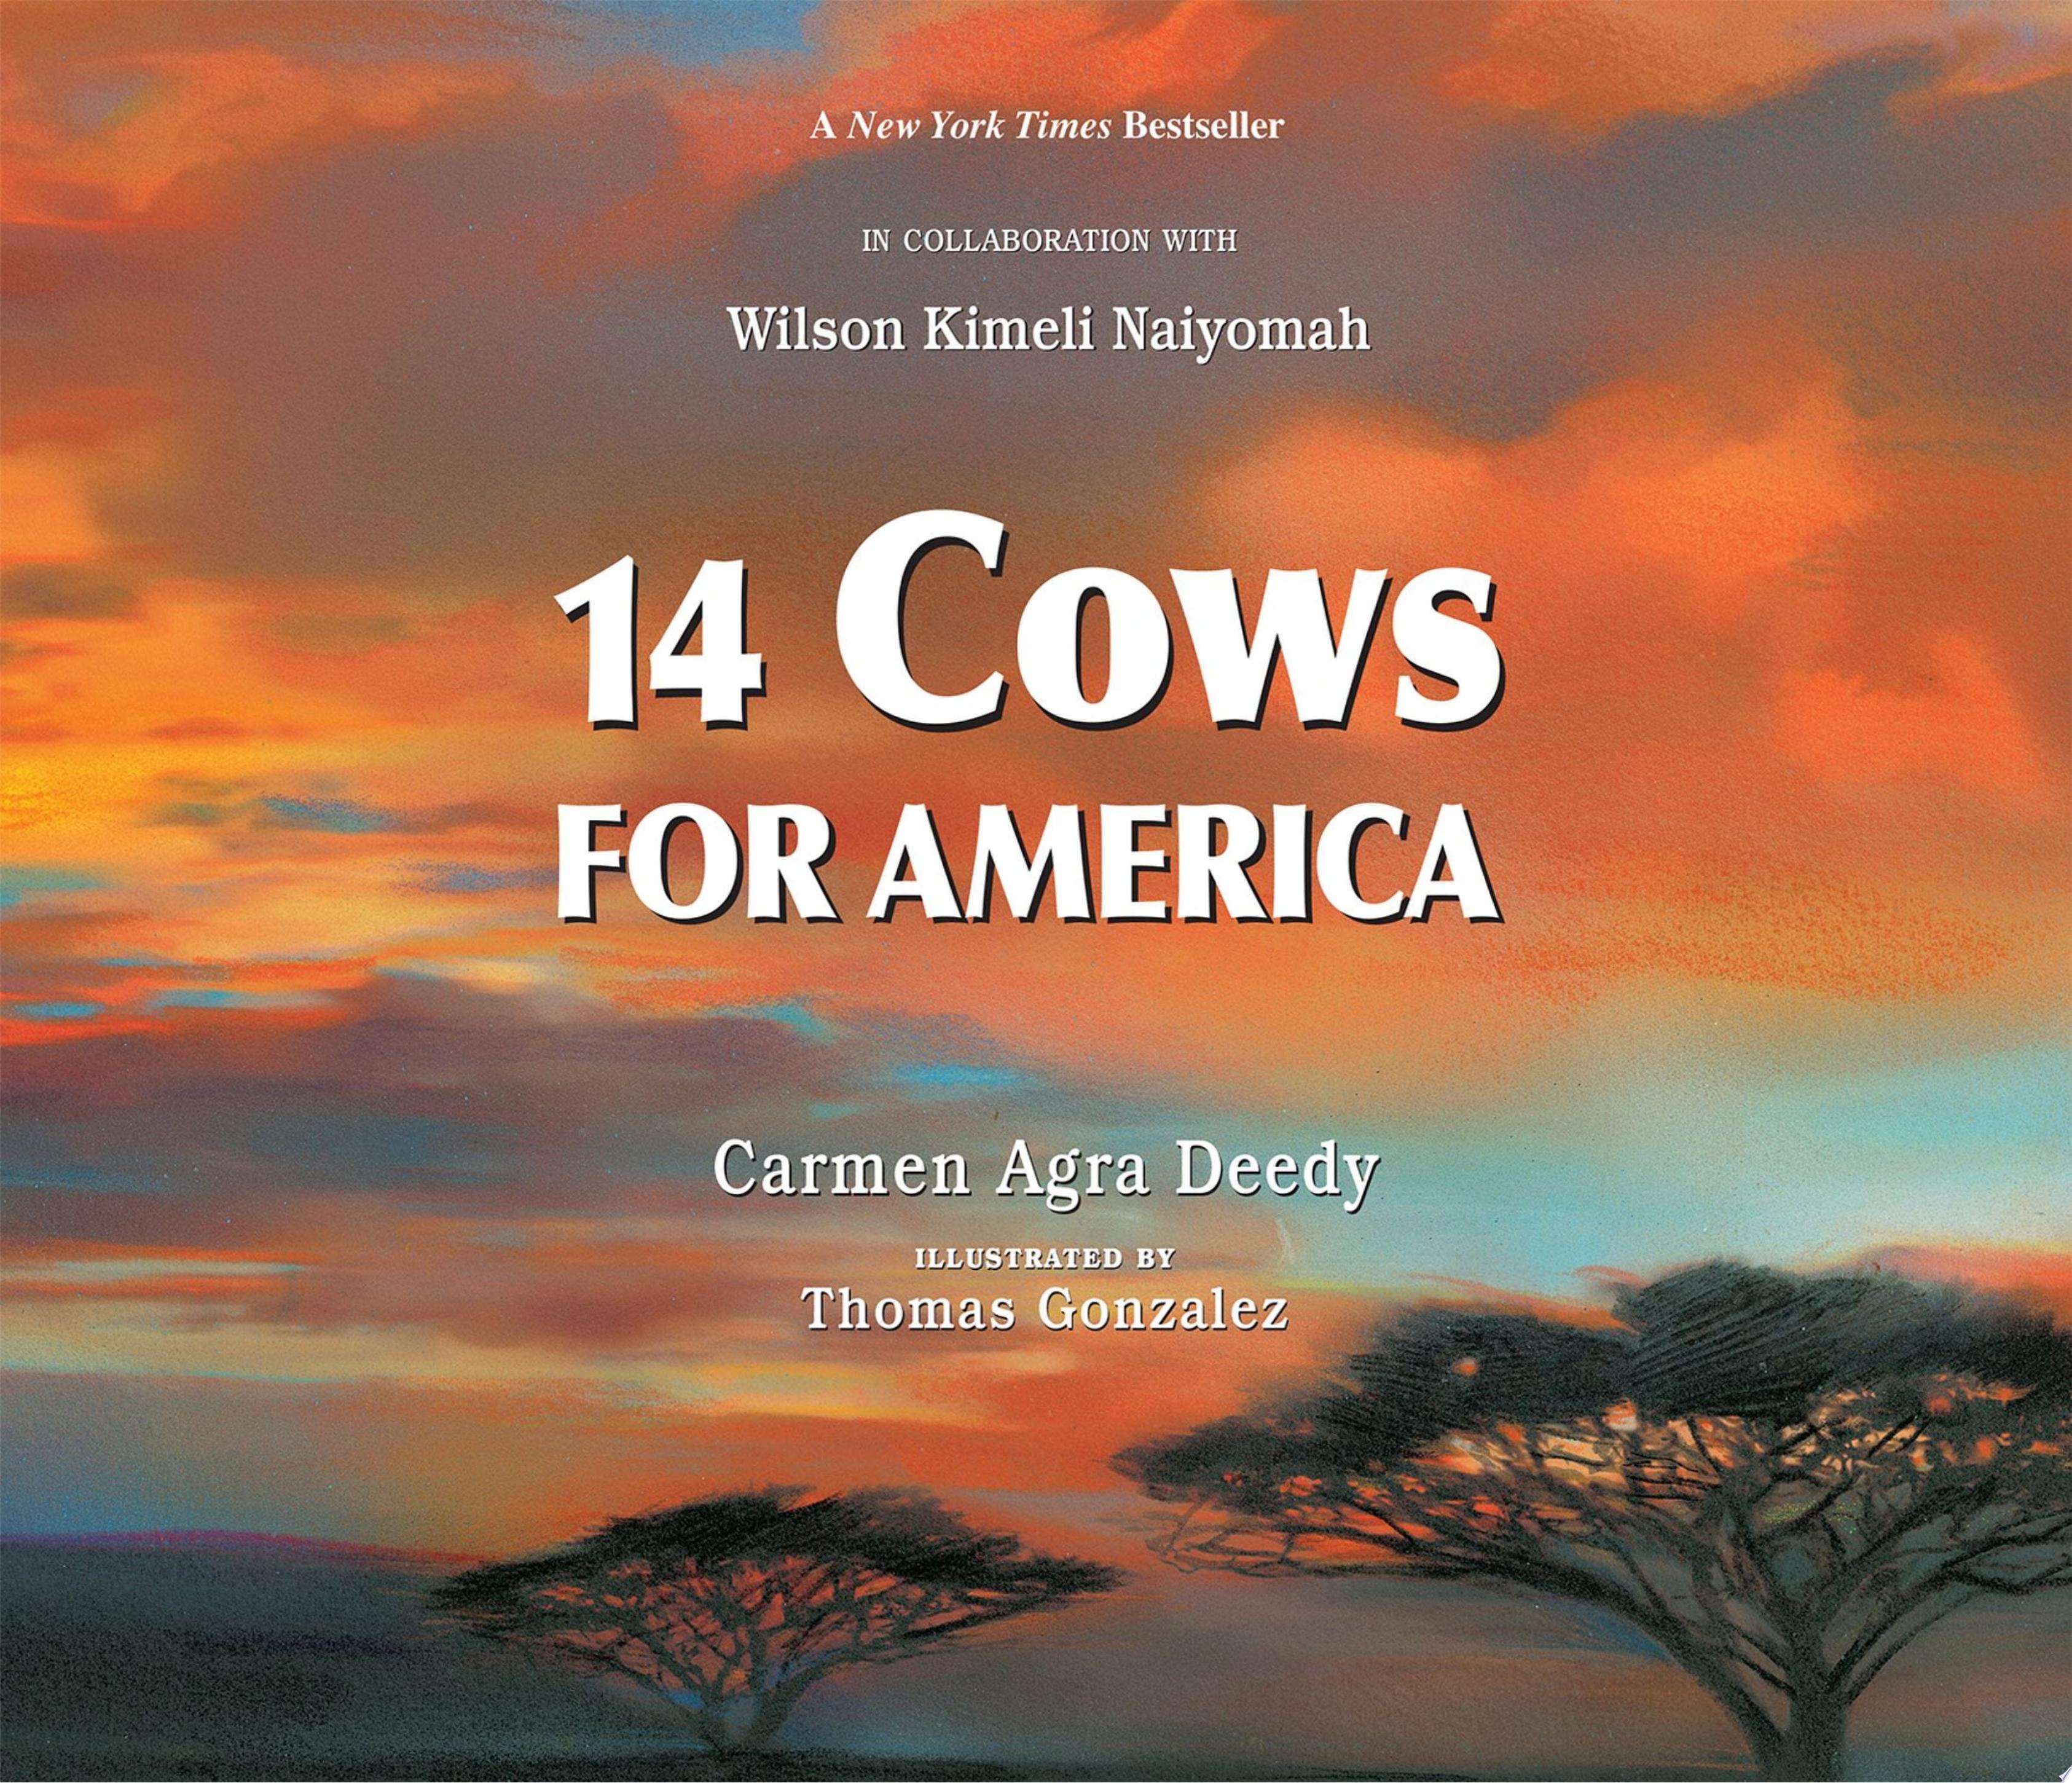 Image for "14 Cows for America"